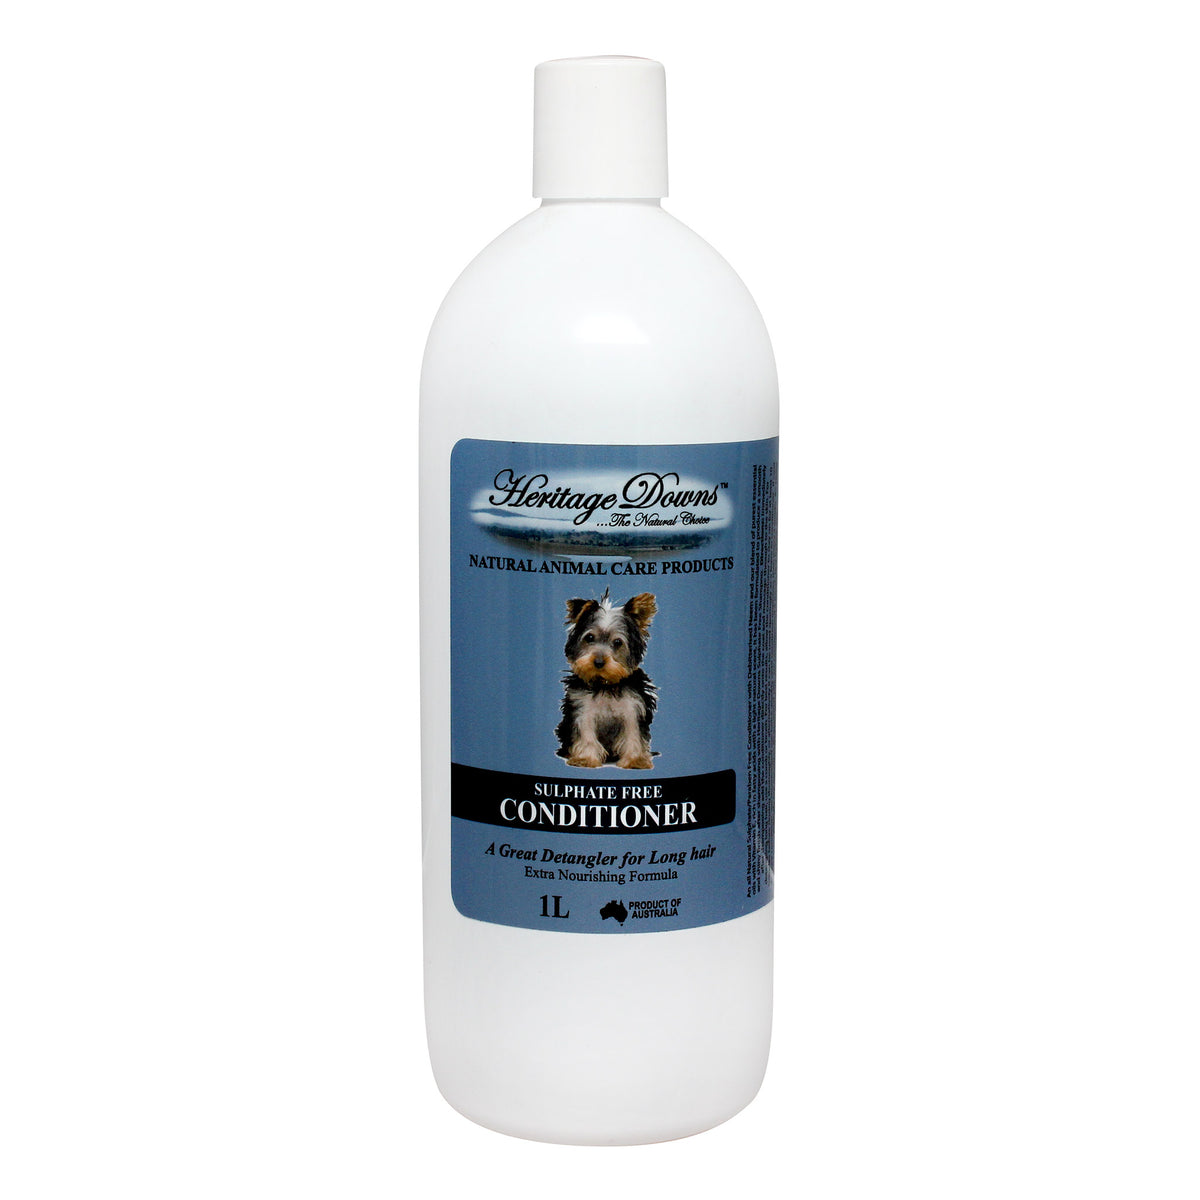 Heritage Downs Sulphate Free Pet Conditioner